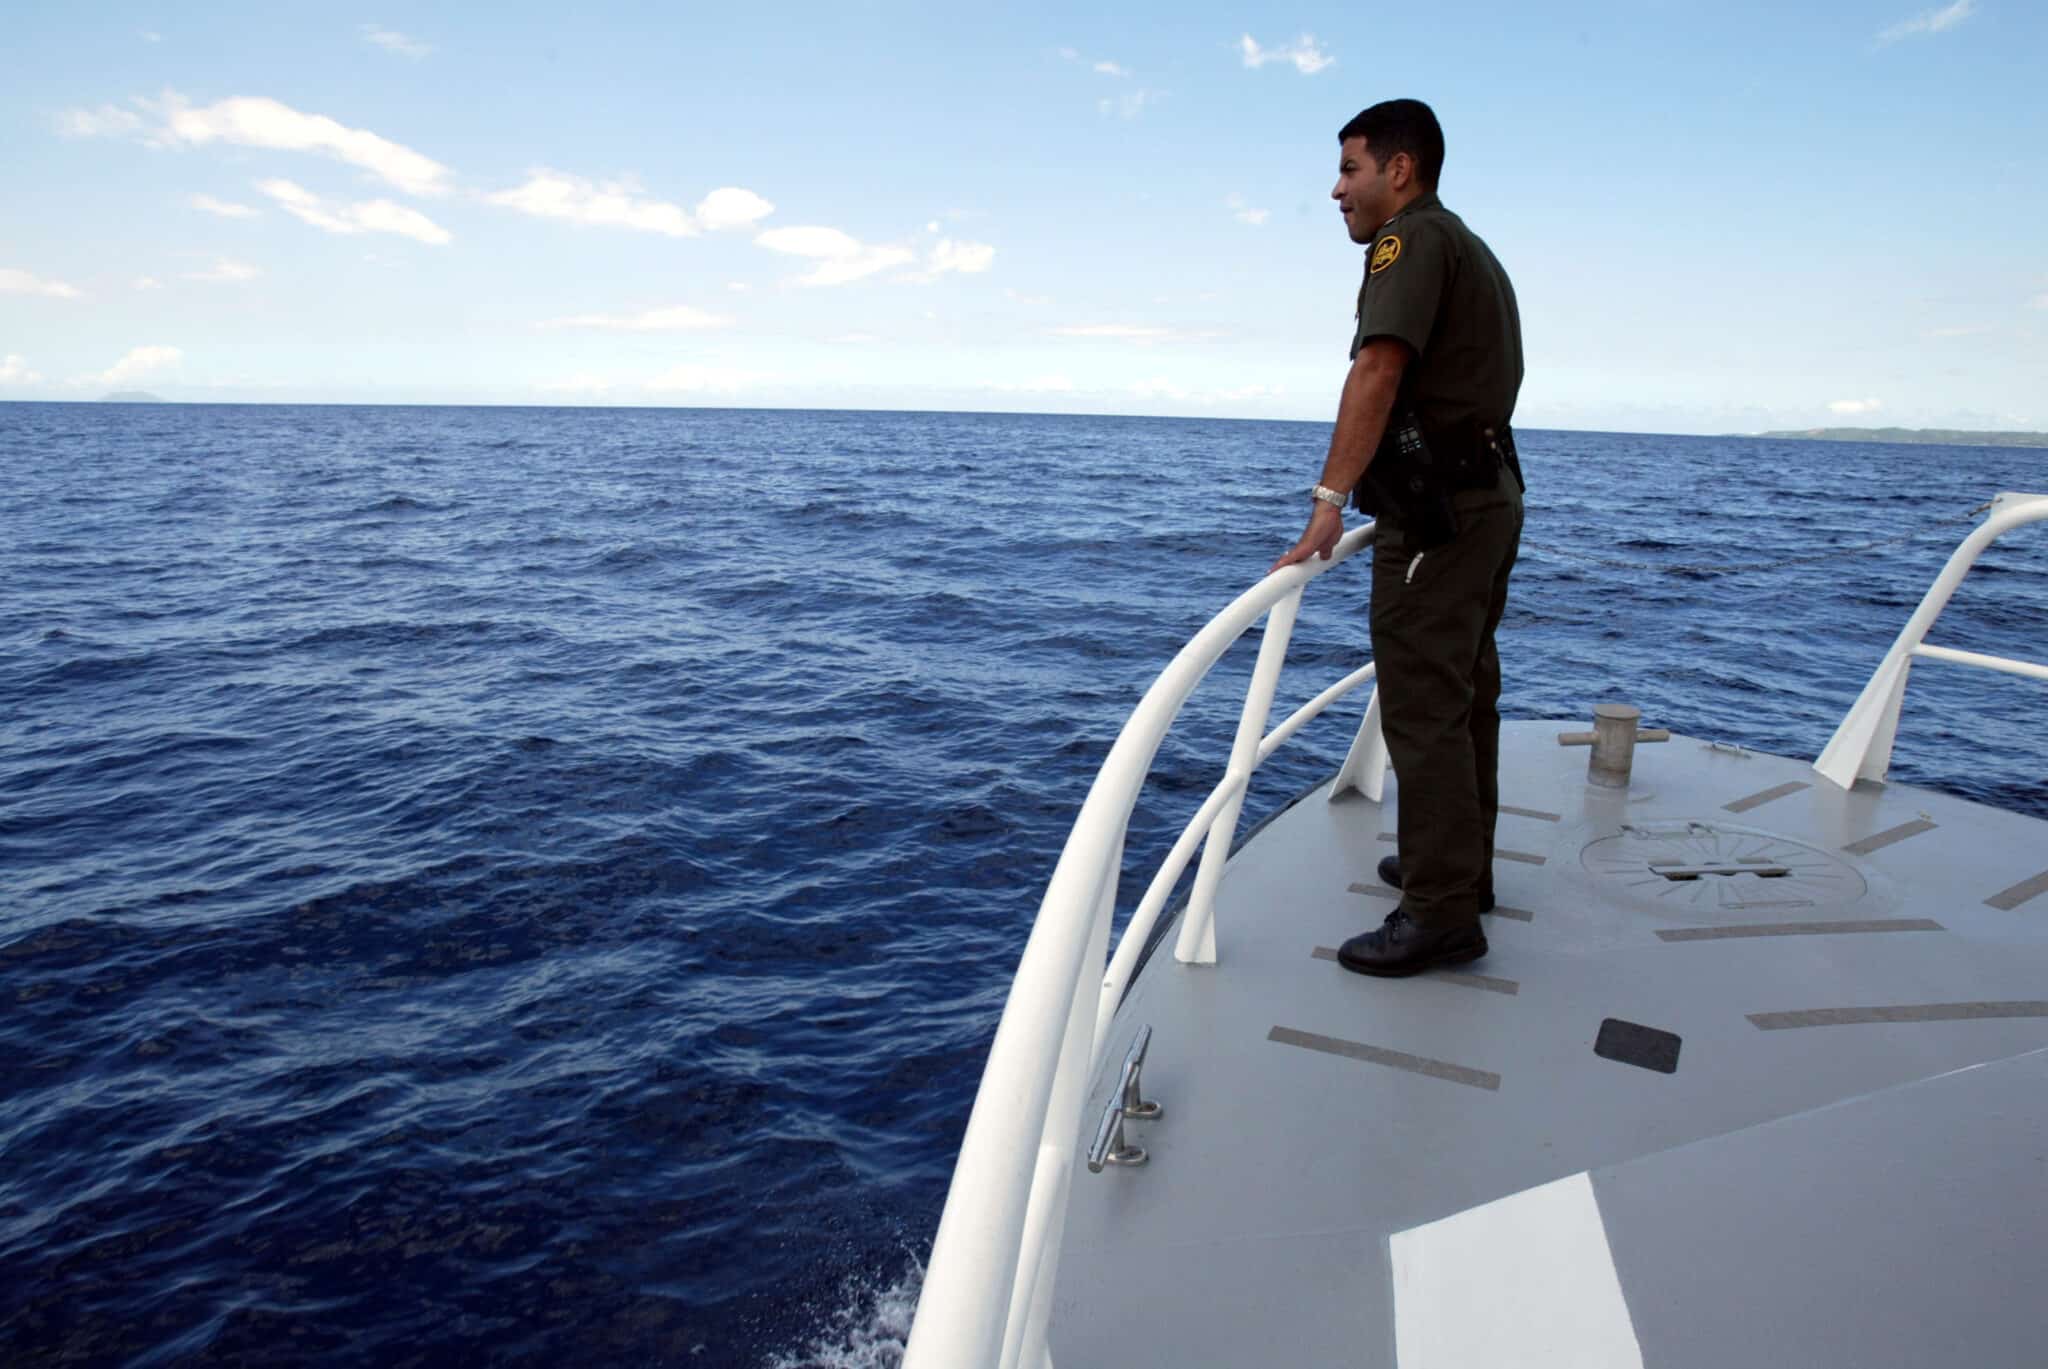 MAYAGUEZ, PUERTO RICO - APRIL 24:  Supervisory U.S. Border Patrol agent Xavier Morales scans the horizon as he rides in the patrol boat April 24, 2004 near Mayaguez, Puerto Rico. A record number of migrants from the Dominican Republic are trying to illegally enter the United States through Puerto Rico. The total number of unlawful migrants attempting to enter Puerto Rico during the 2004 fiscal year is 5,756 as apposed to a total of 3, 477 for all of the 2003 fiscal year. Due to a sagging economy, rising cost of living and high unemployment people are fleeing the Dominican Republic in search of a better life.  (Photo by Joe Raedle/Getty Images)